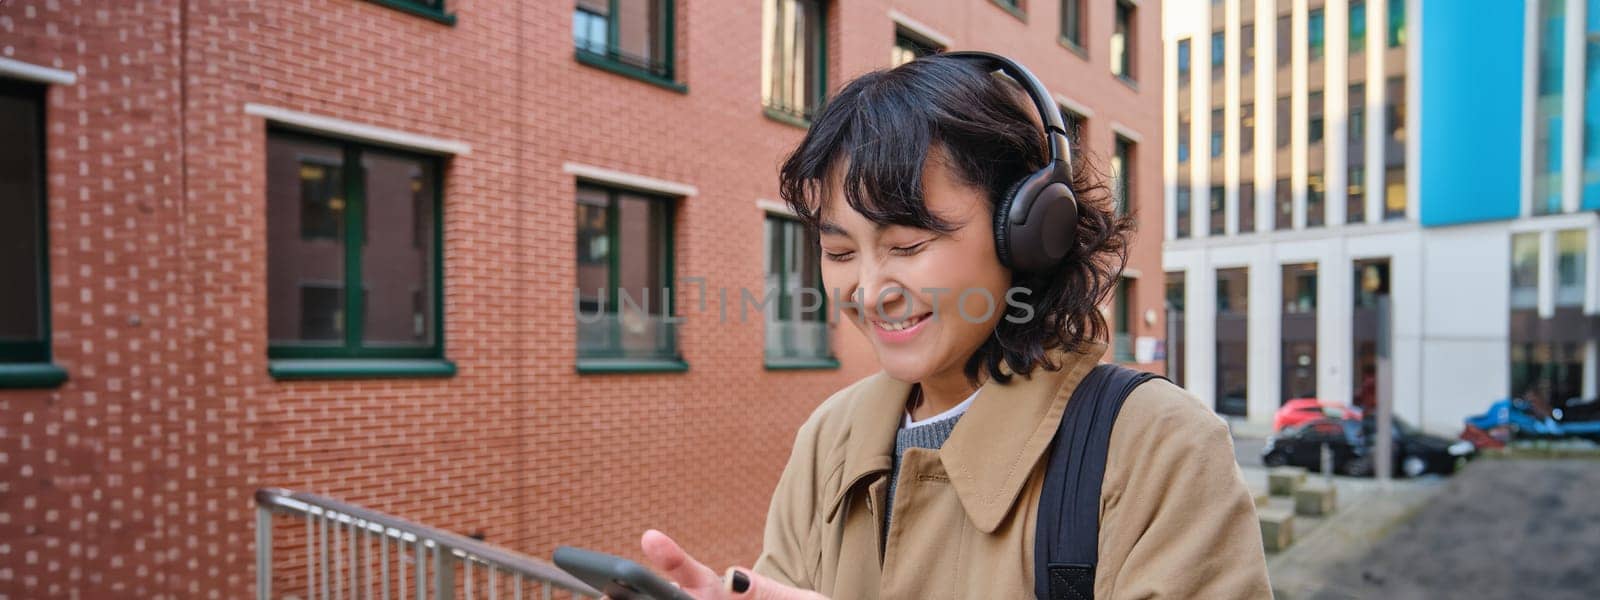 Happy korean girl looks at mobile phone and listens music in headphones, stands on street in city centre, reads text message on smartphone.